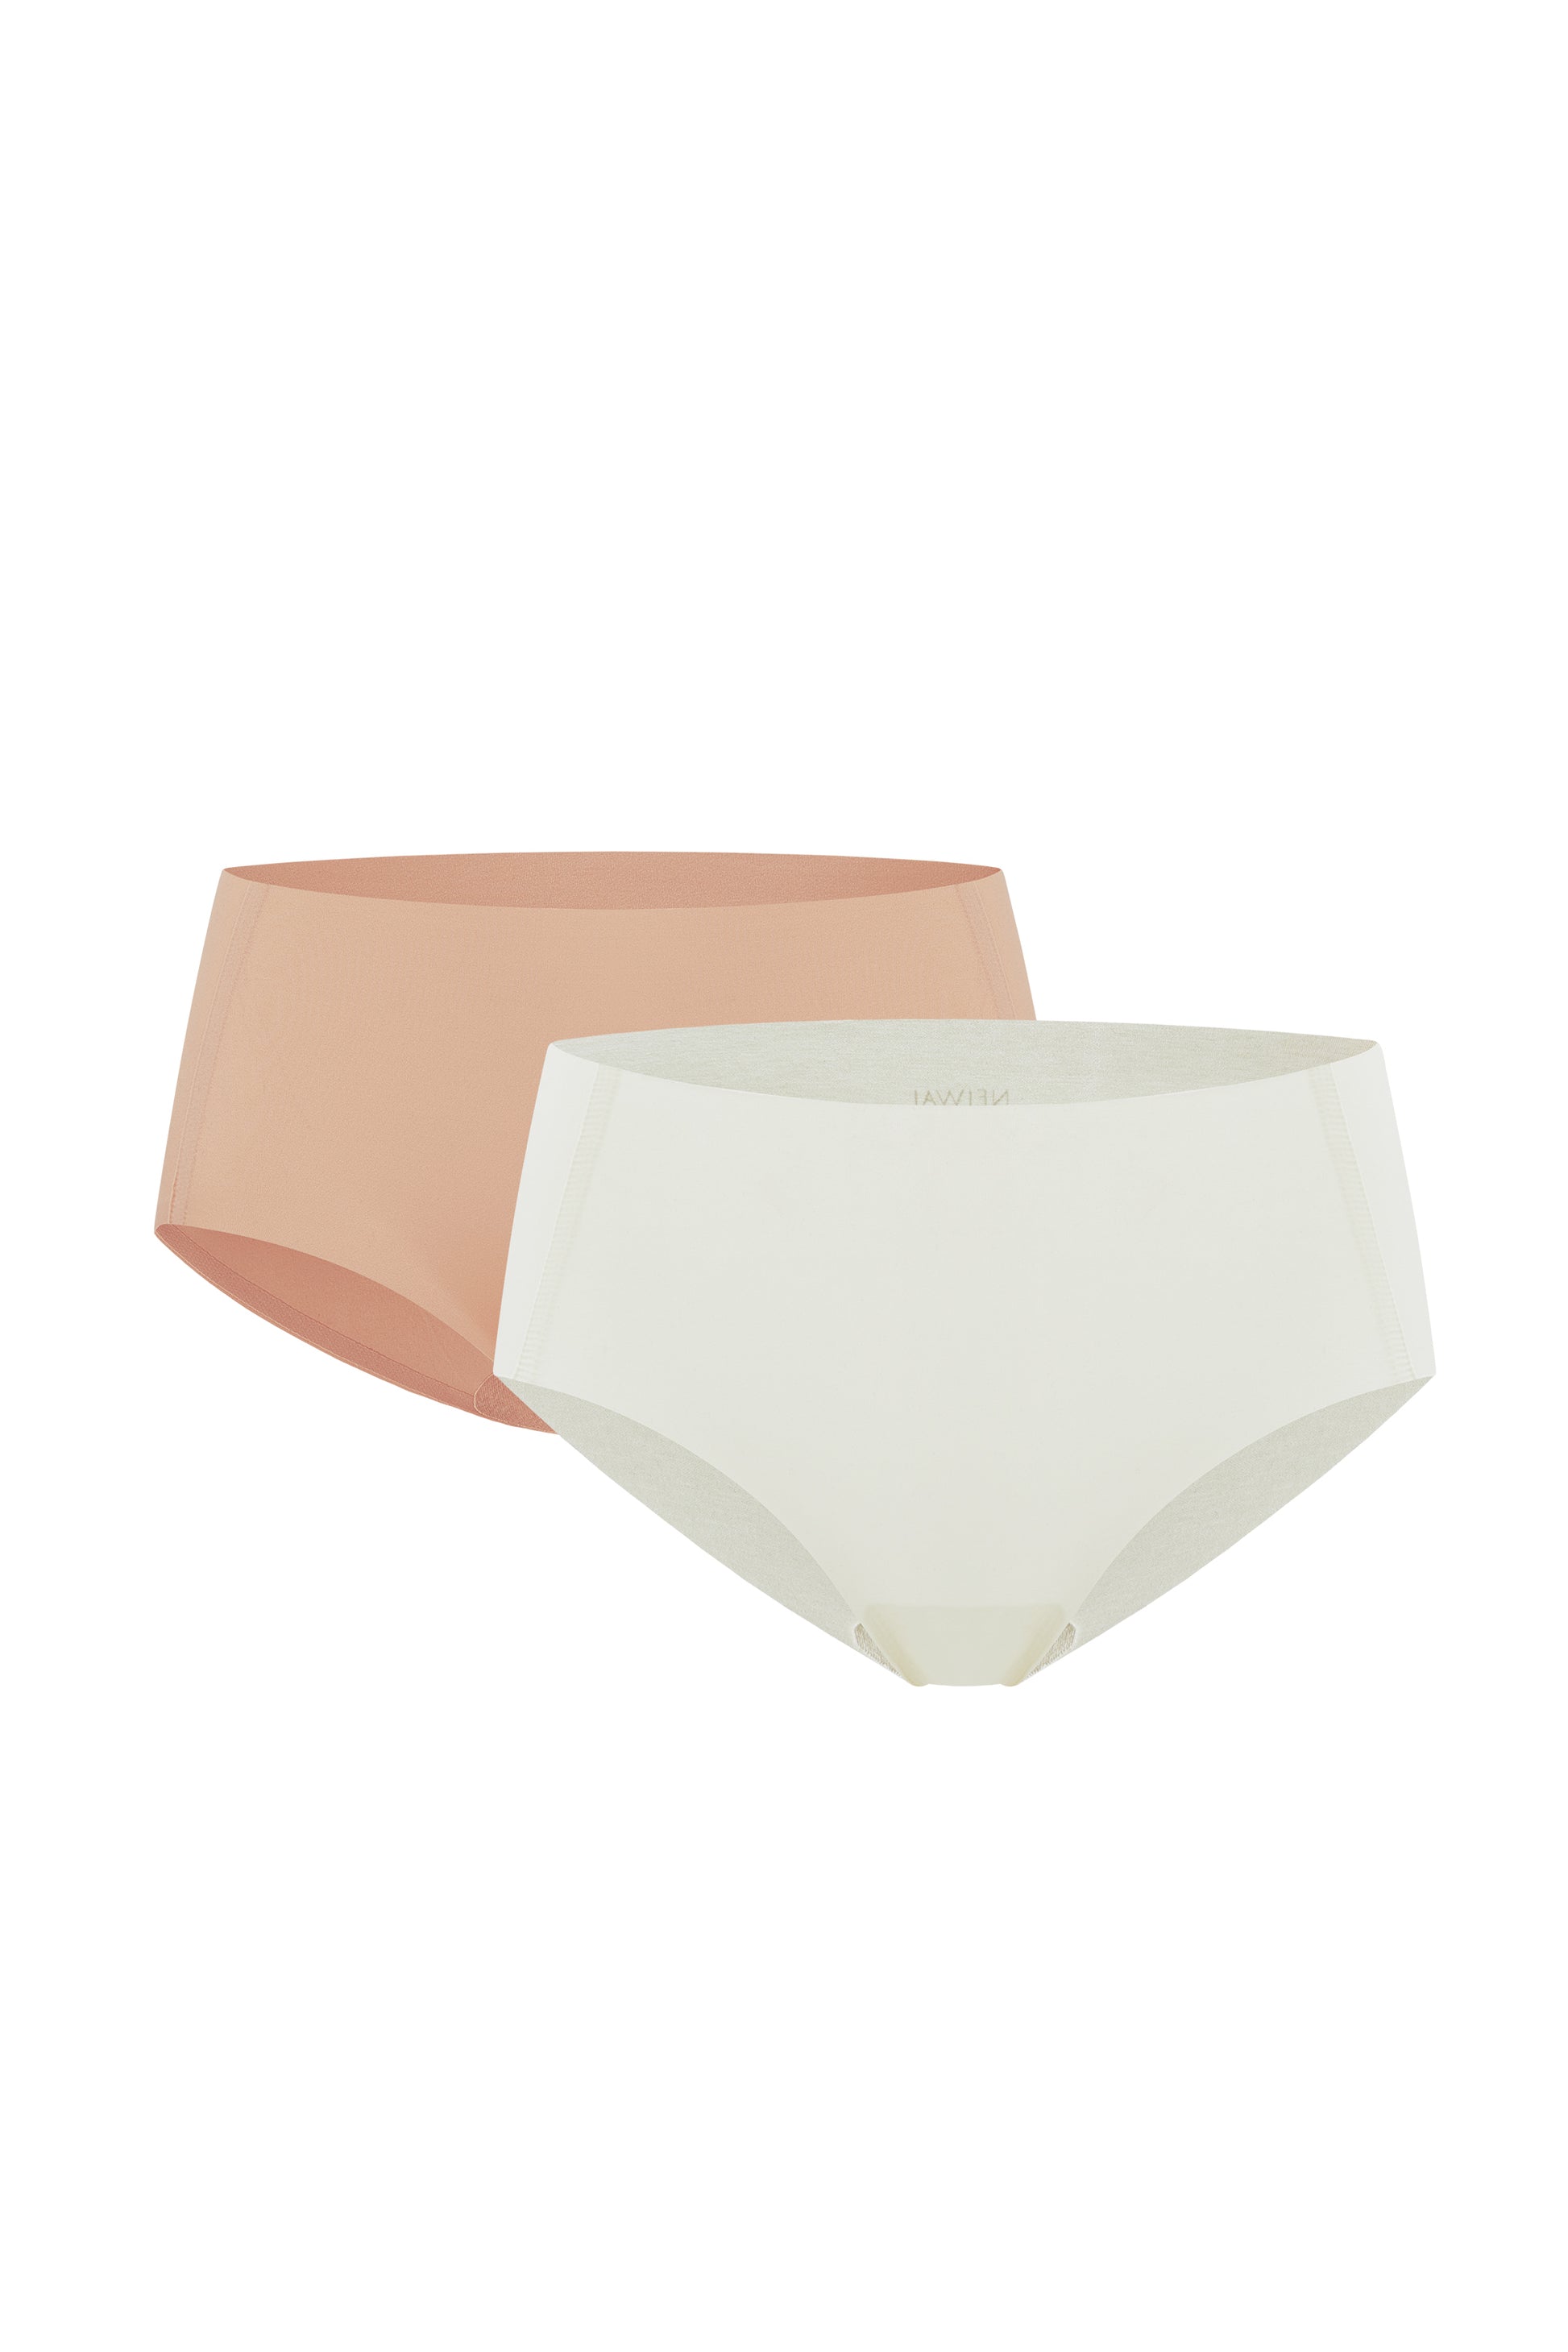 two briefs in beige and off white